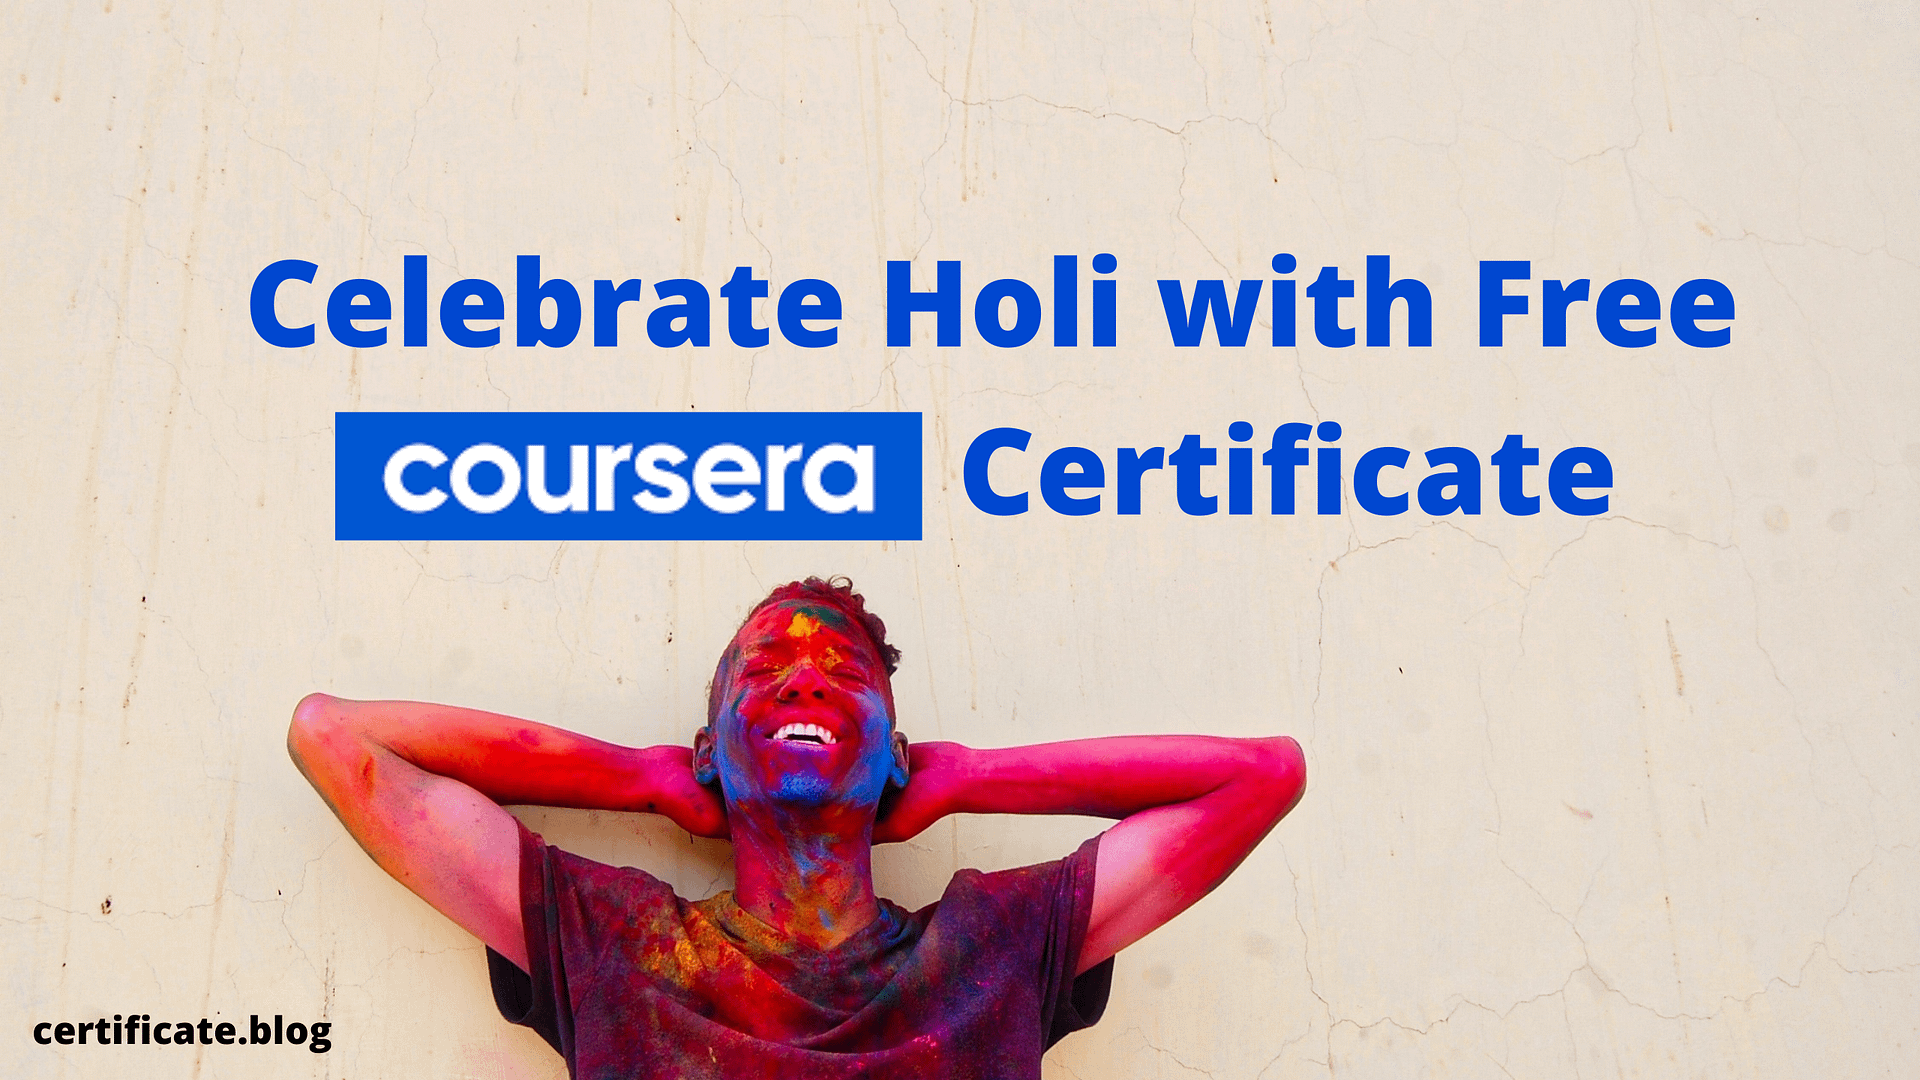 Celebrate Holi with Top 10 Free Coursera Certificate Courses [End 2nd April]